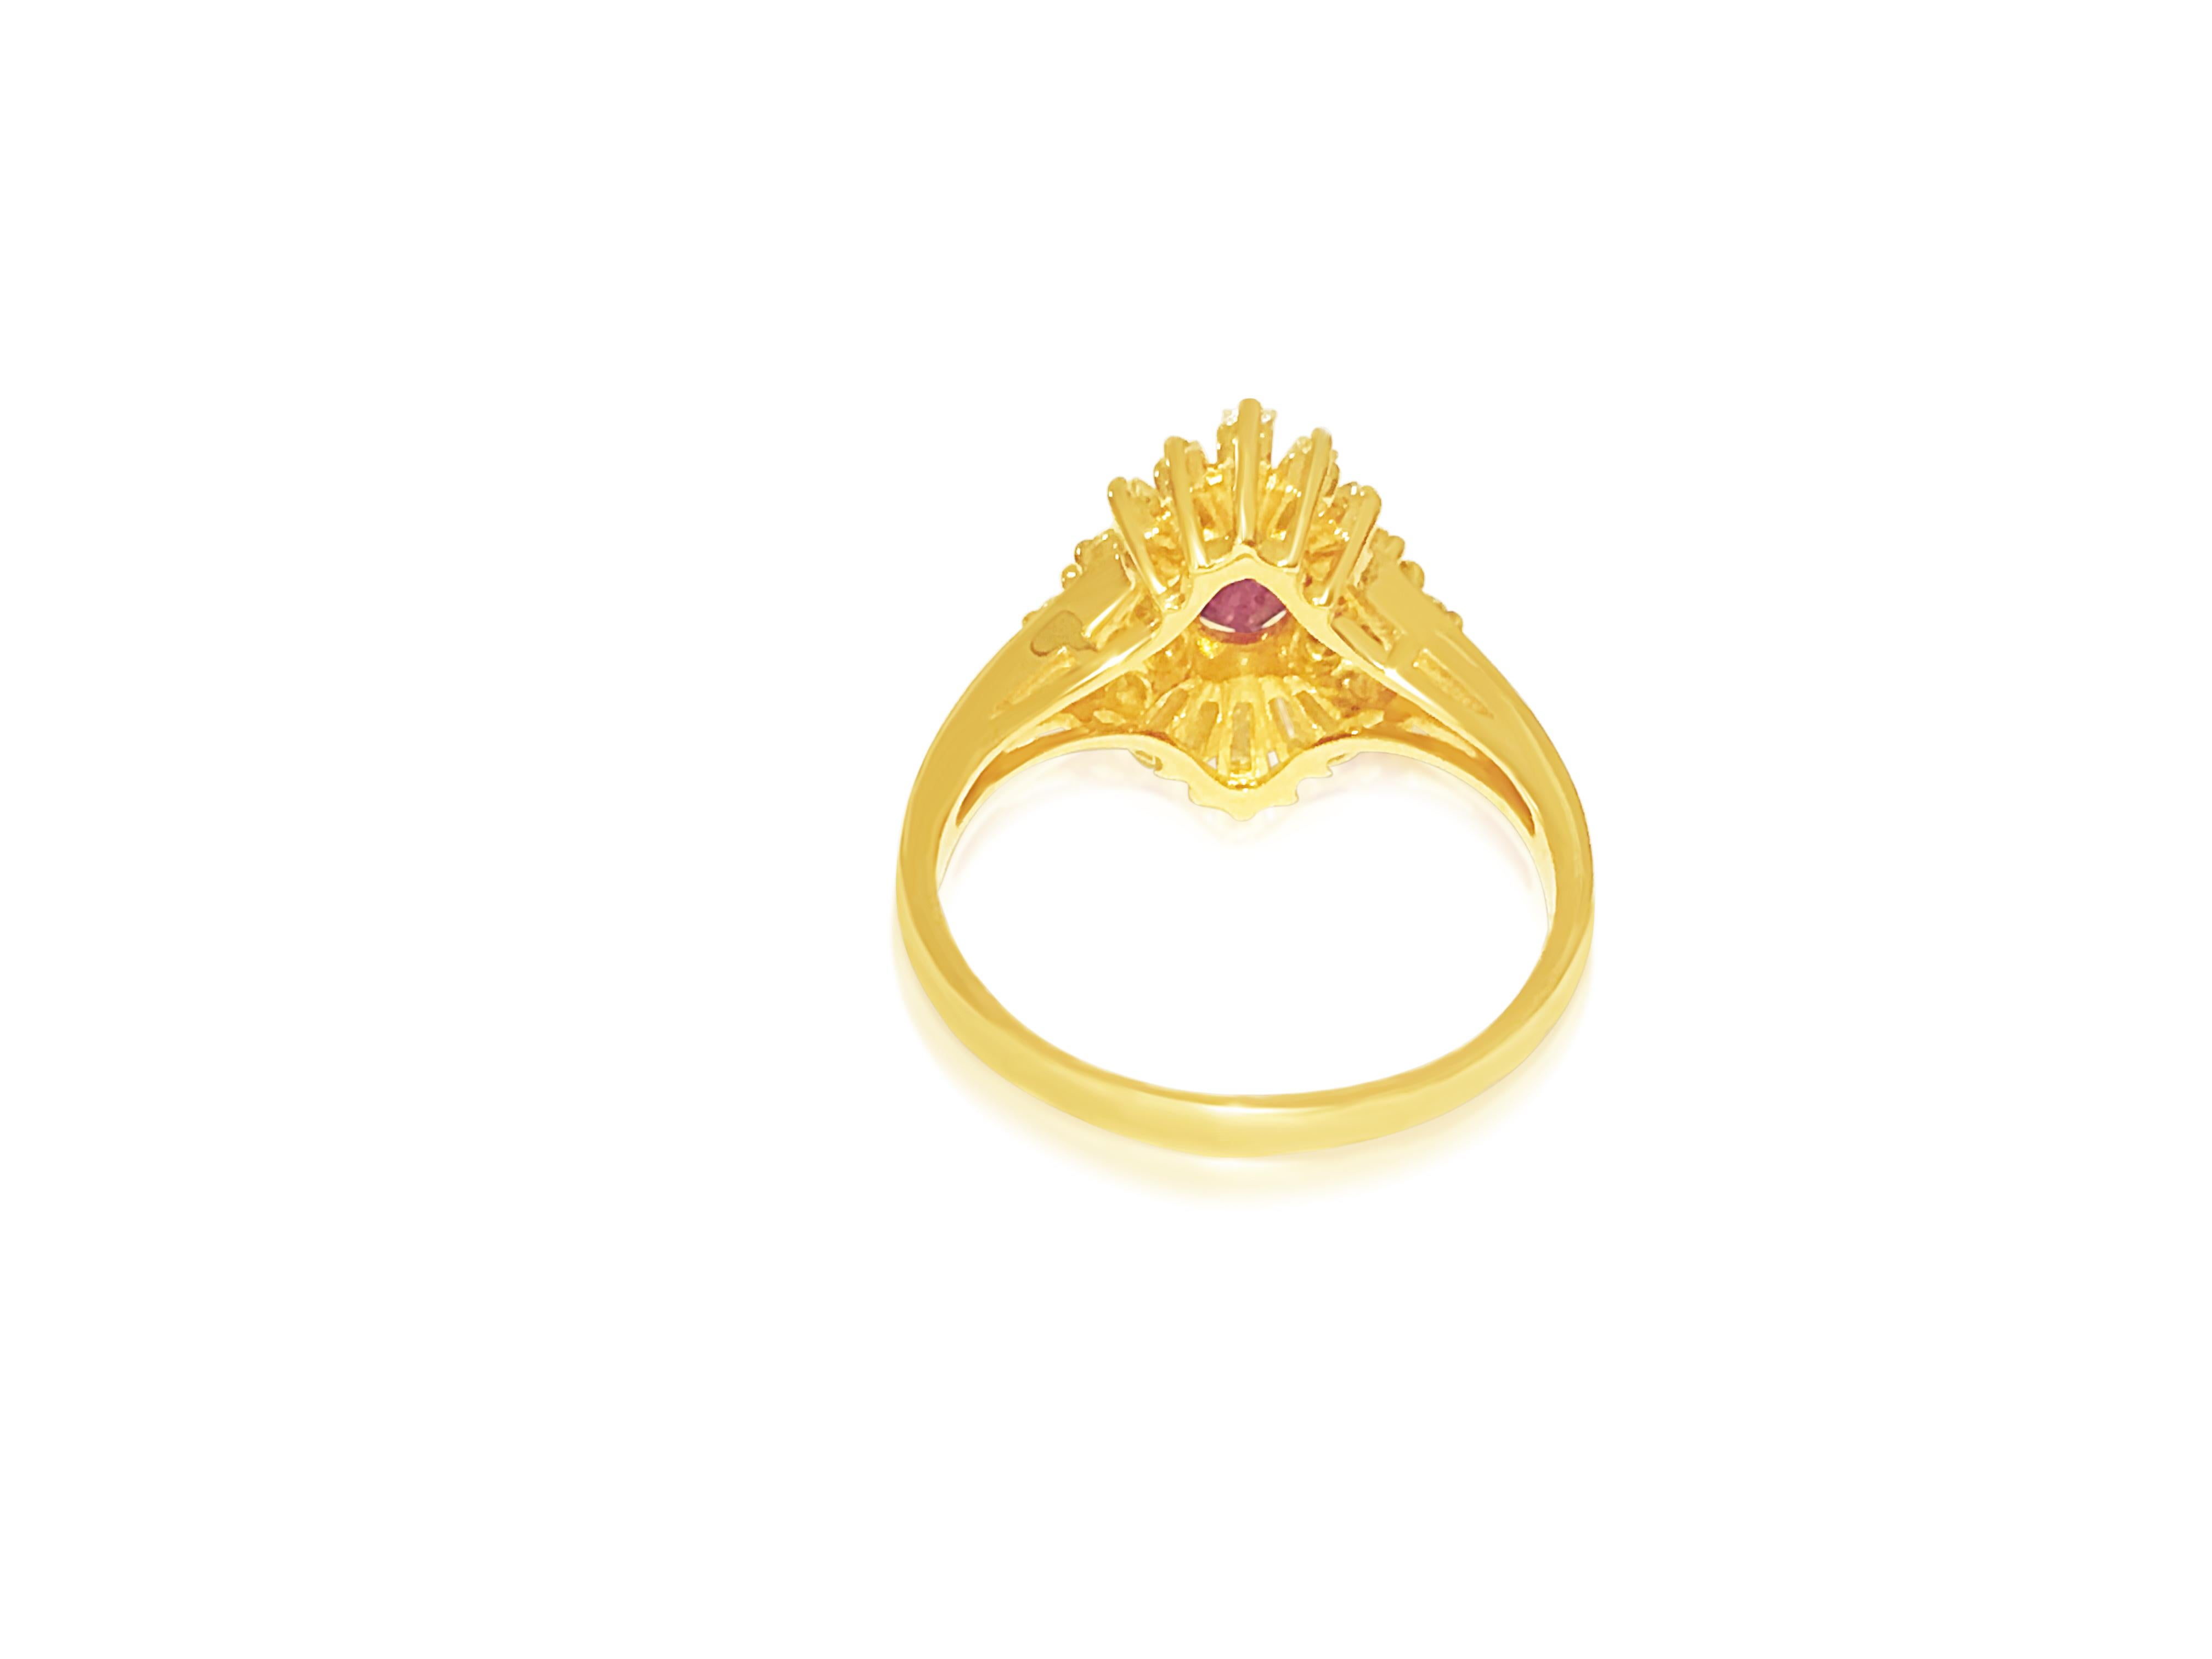 Natural 1.75ct Ruby & Diamond Ring in Solid 14K Gold In Excellent Condition For Sale In Miami, FL